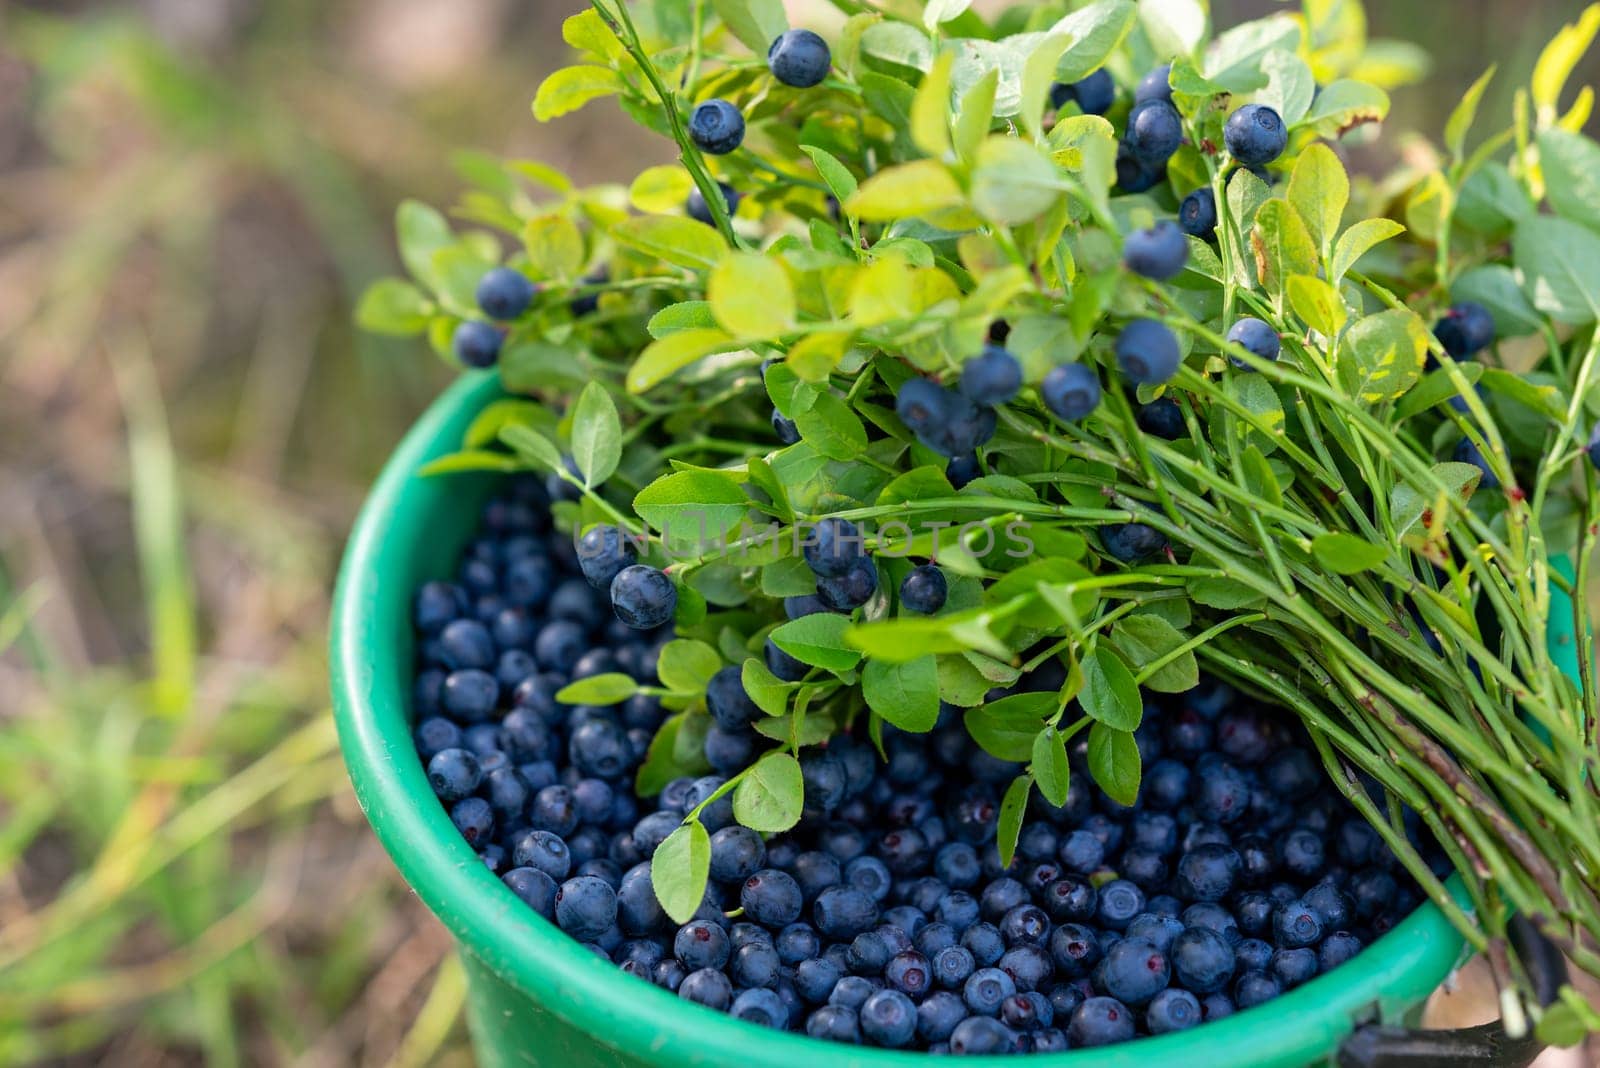 Ripe blueberries in a plastic bucket outdoors, close up by VitaliiPetrushenko